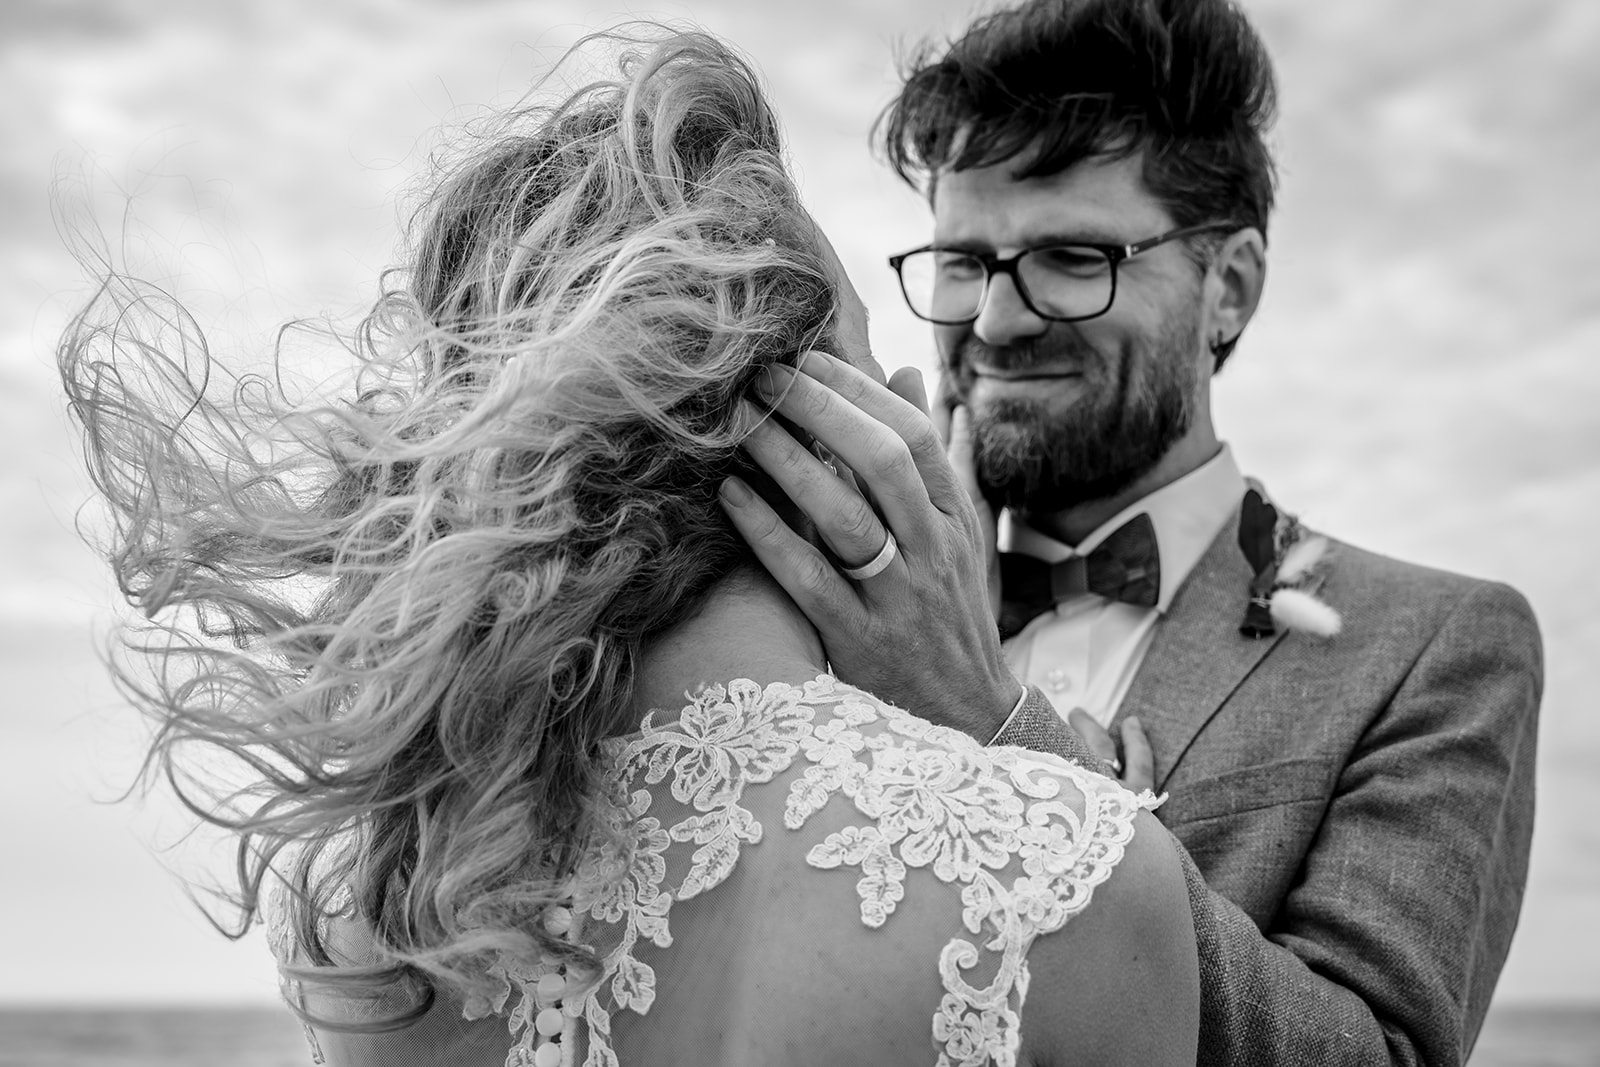 True love on your wedding day in black and white image. Wind blowing in the brides hair and ready to kiss